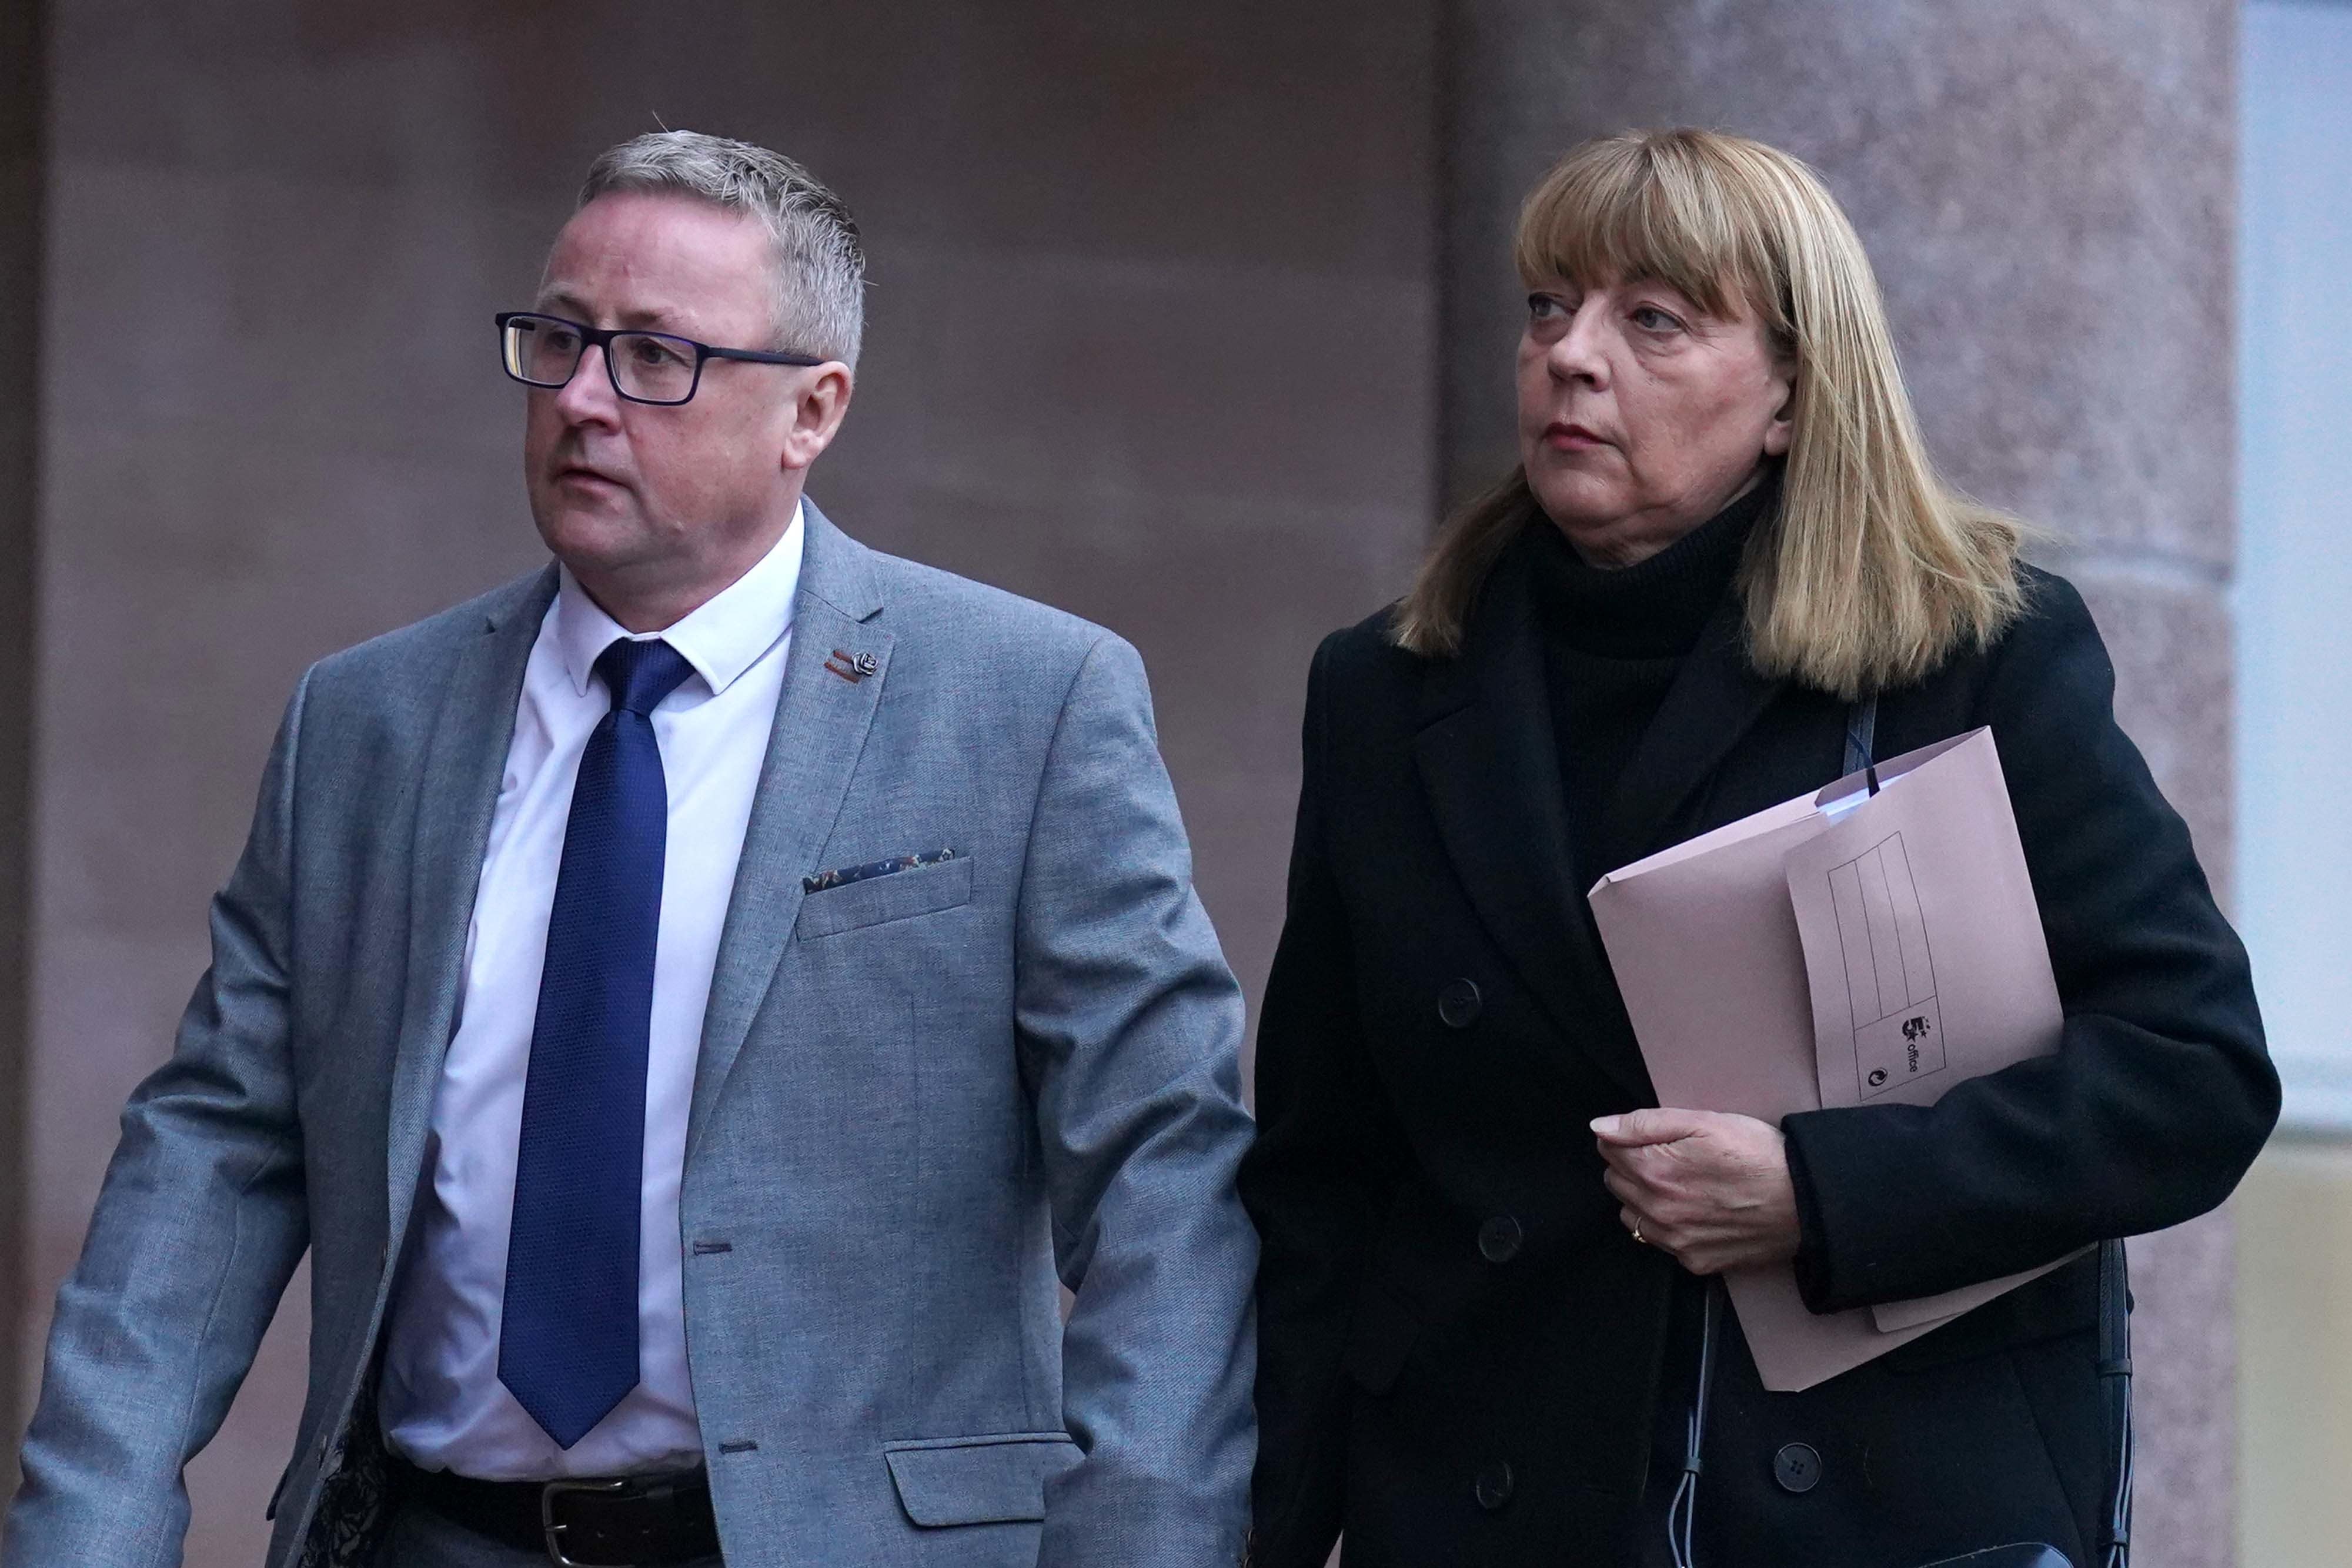 Linda and Stuart Allan, the parents of Katie Allan arrive at Falkirk Sheriff Court (Andrew Milligan/PA)